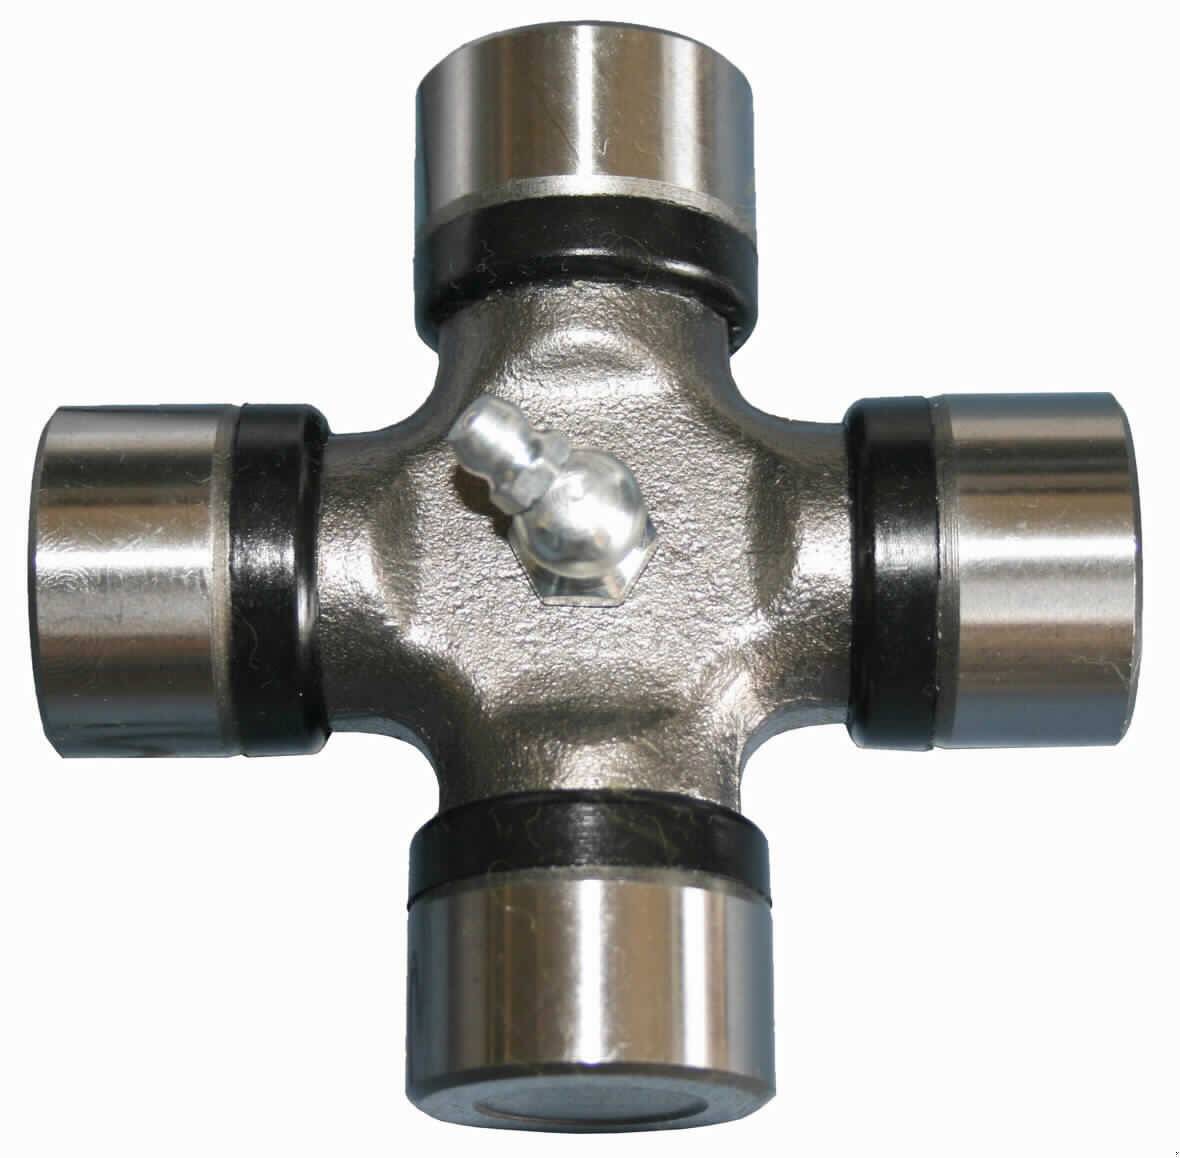 U-joint